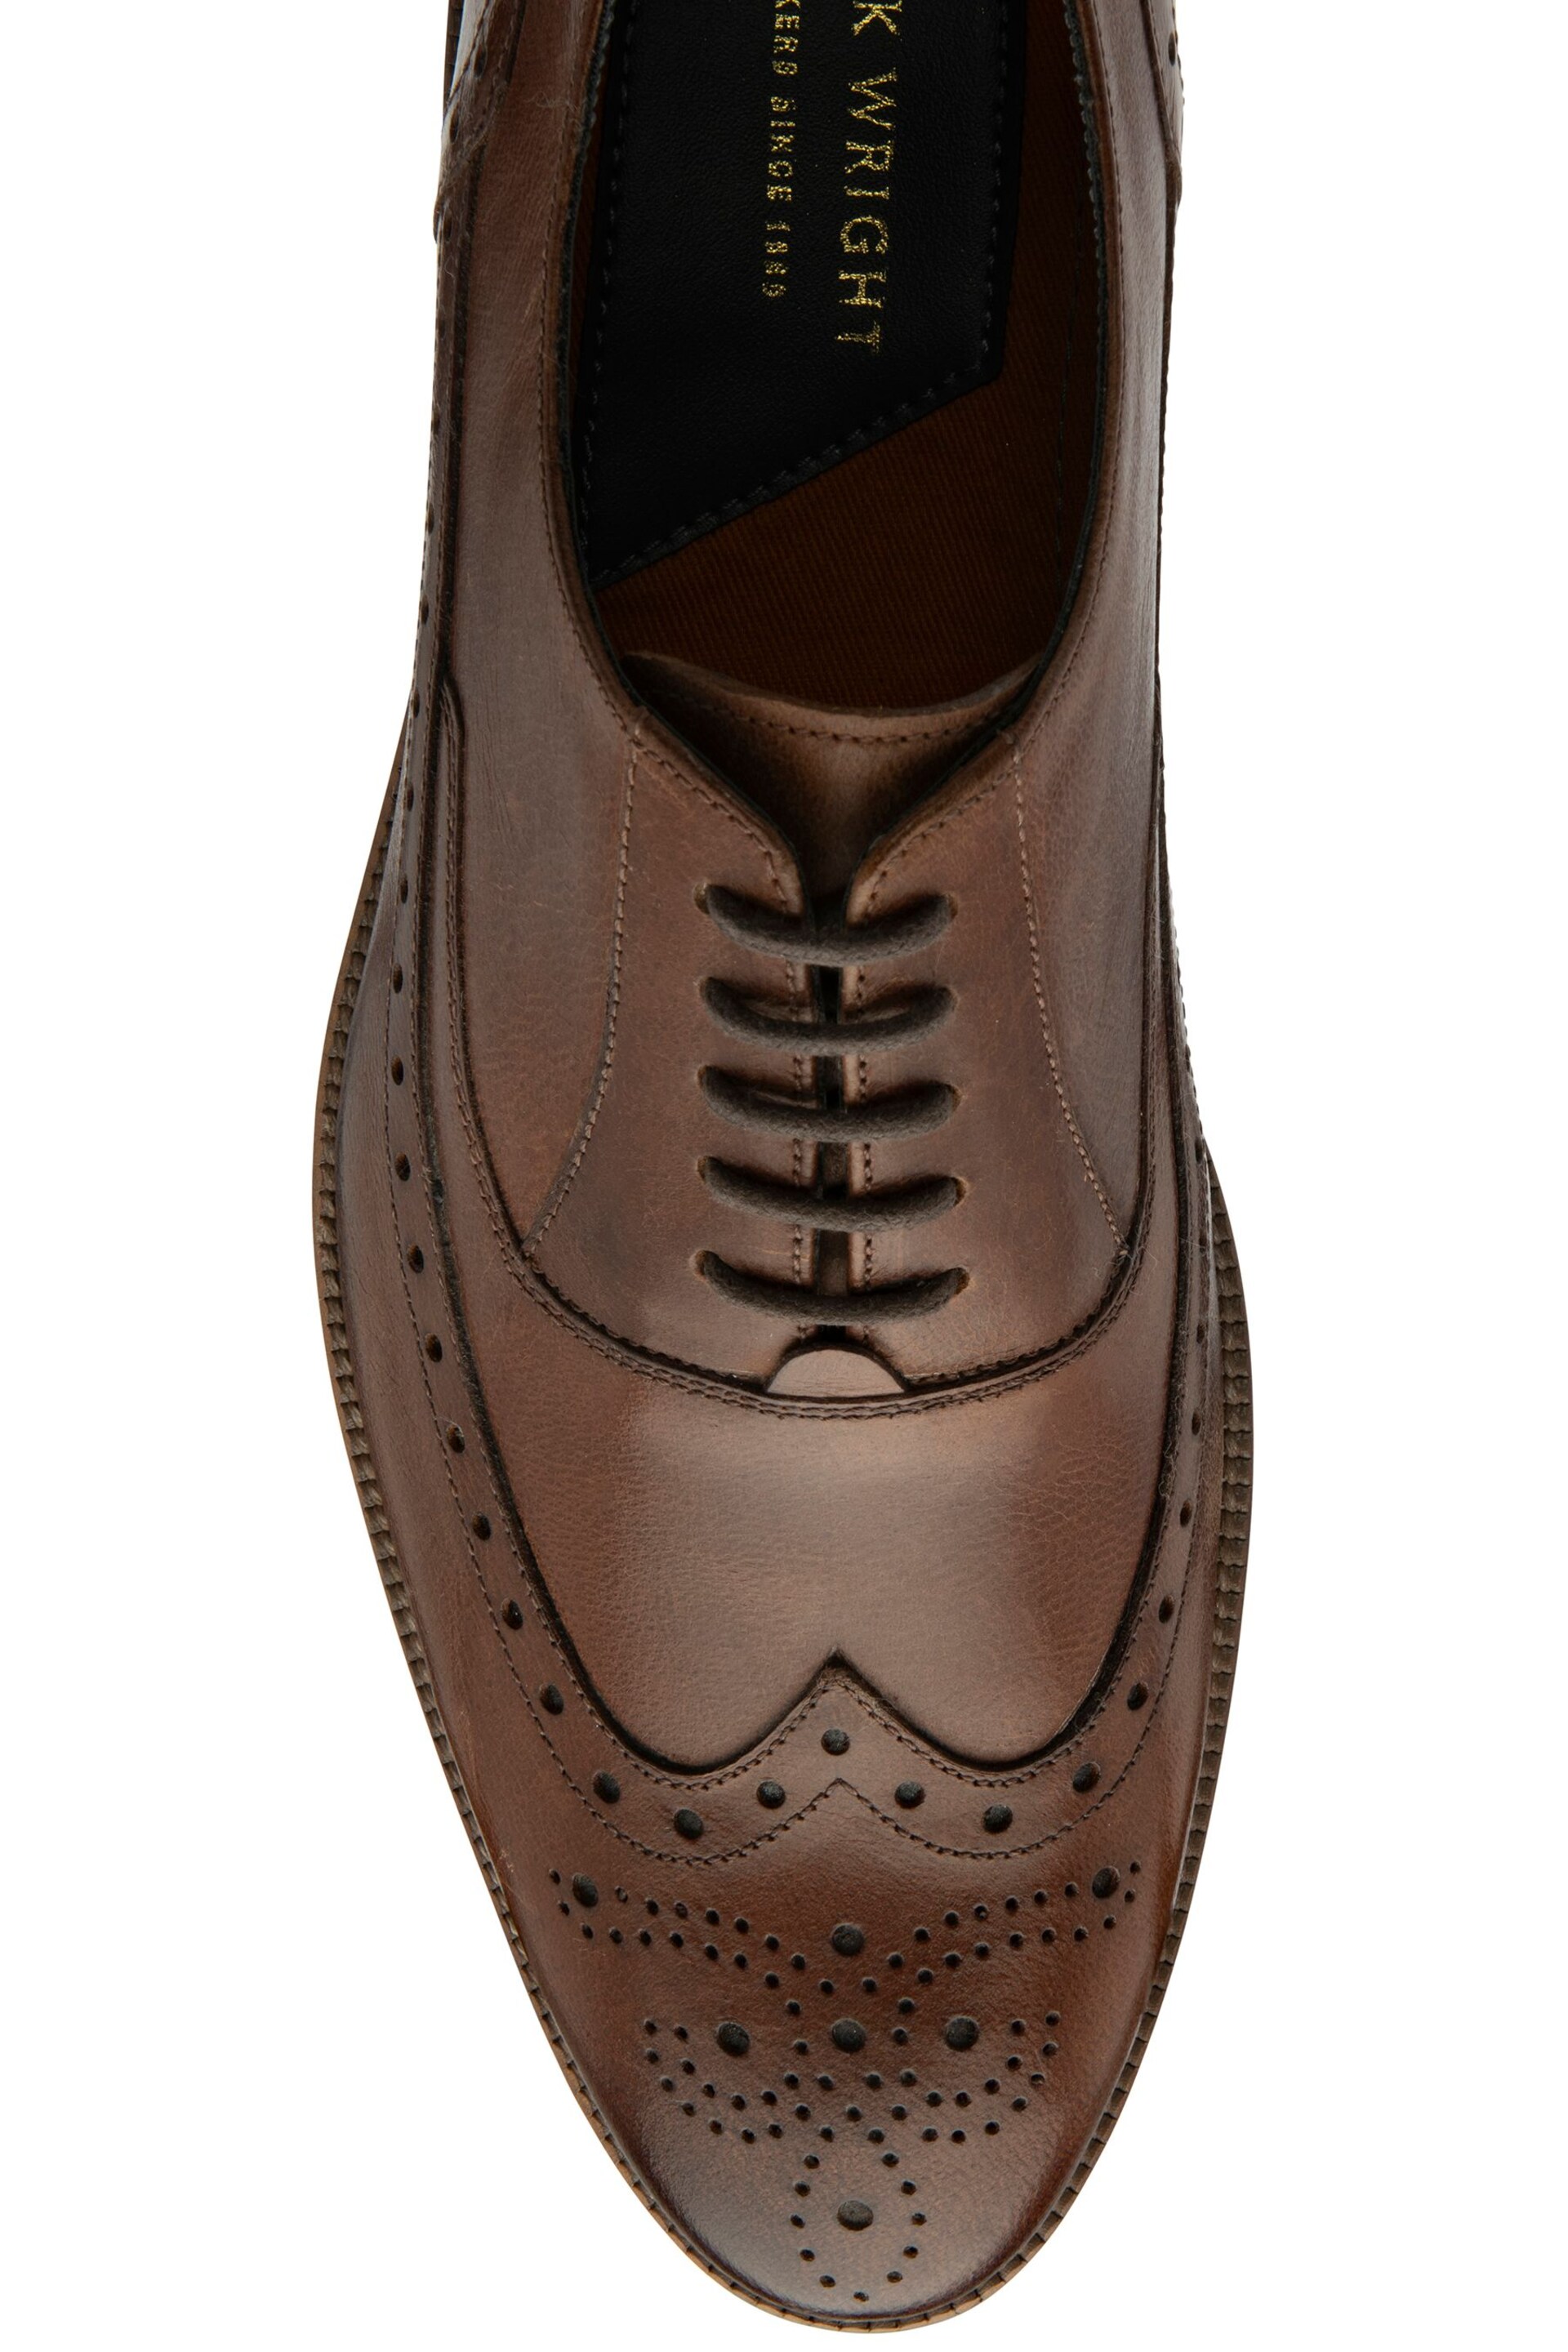 Frank Wright Brown Leather Lace-Up Mens Brogues - Image 4 of 4